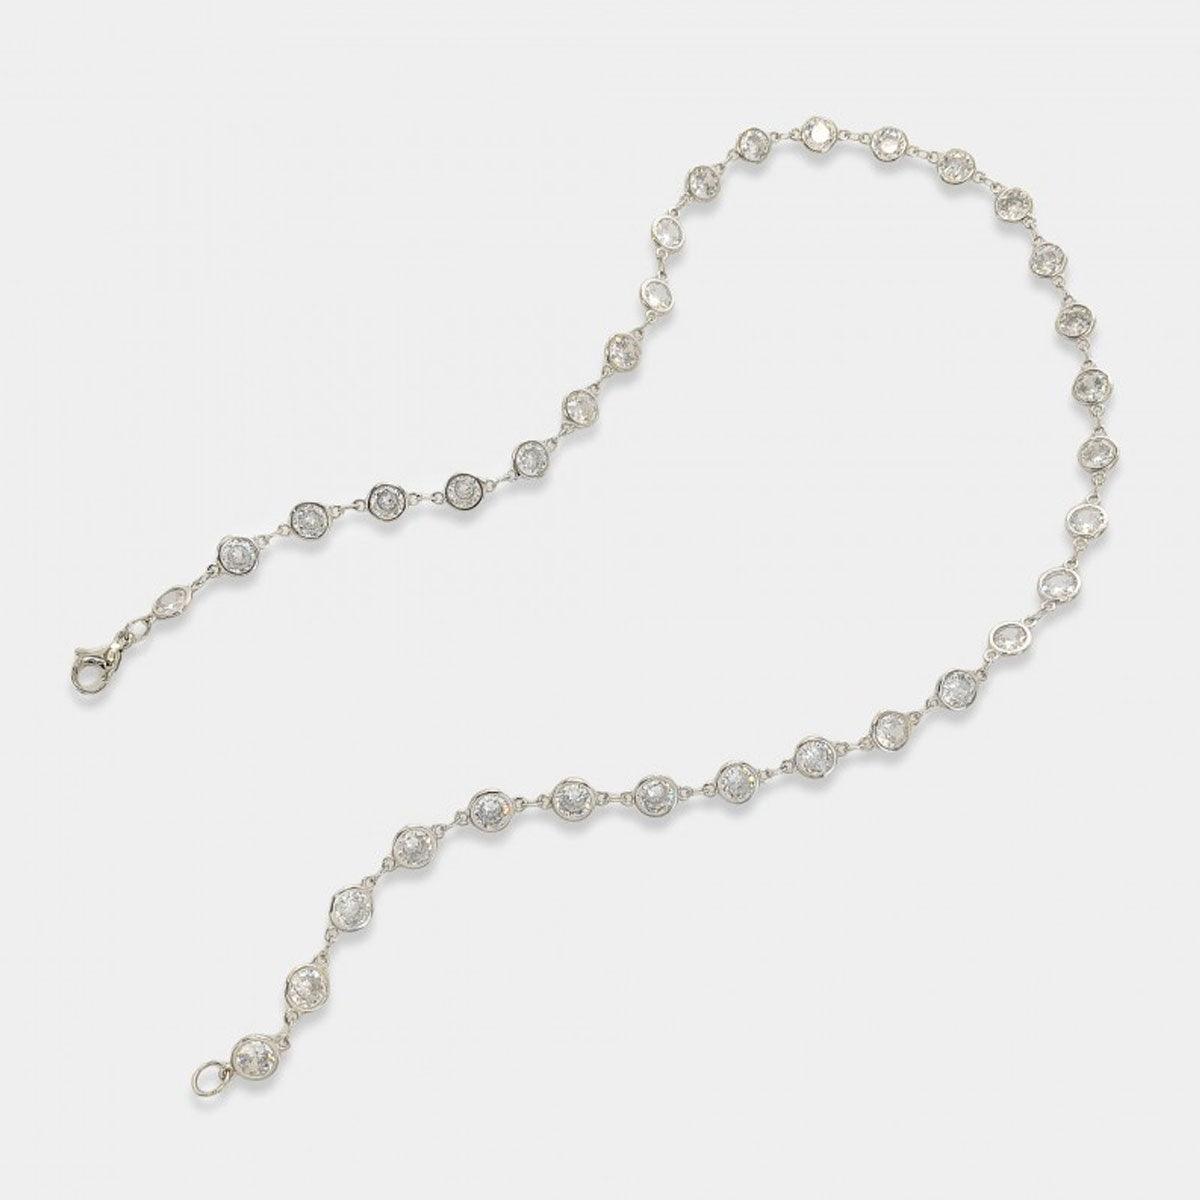 OMG BLINGS - 8mm CZ Chain Necklace - Arktana - Jewelry